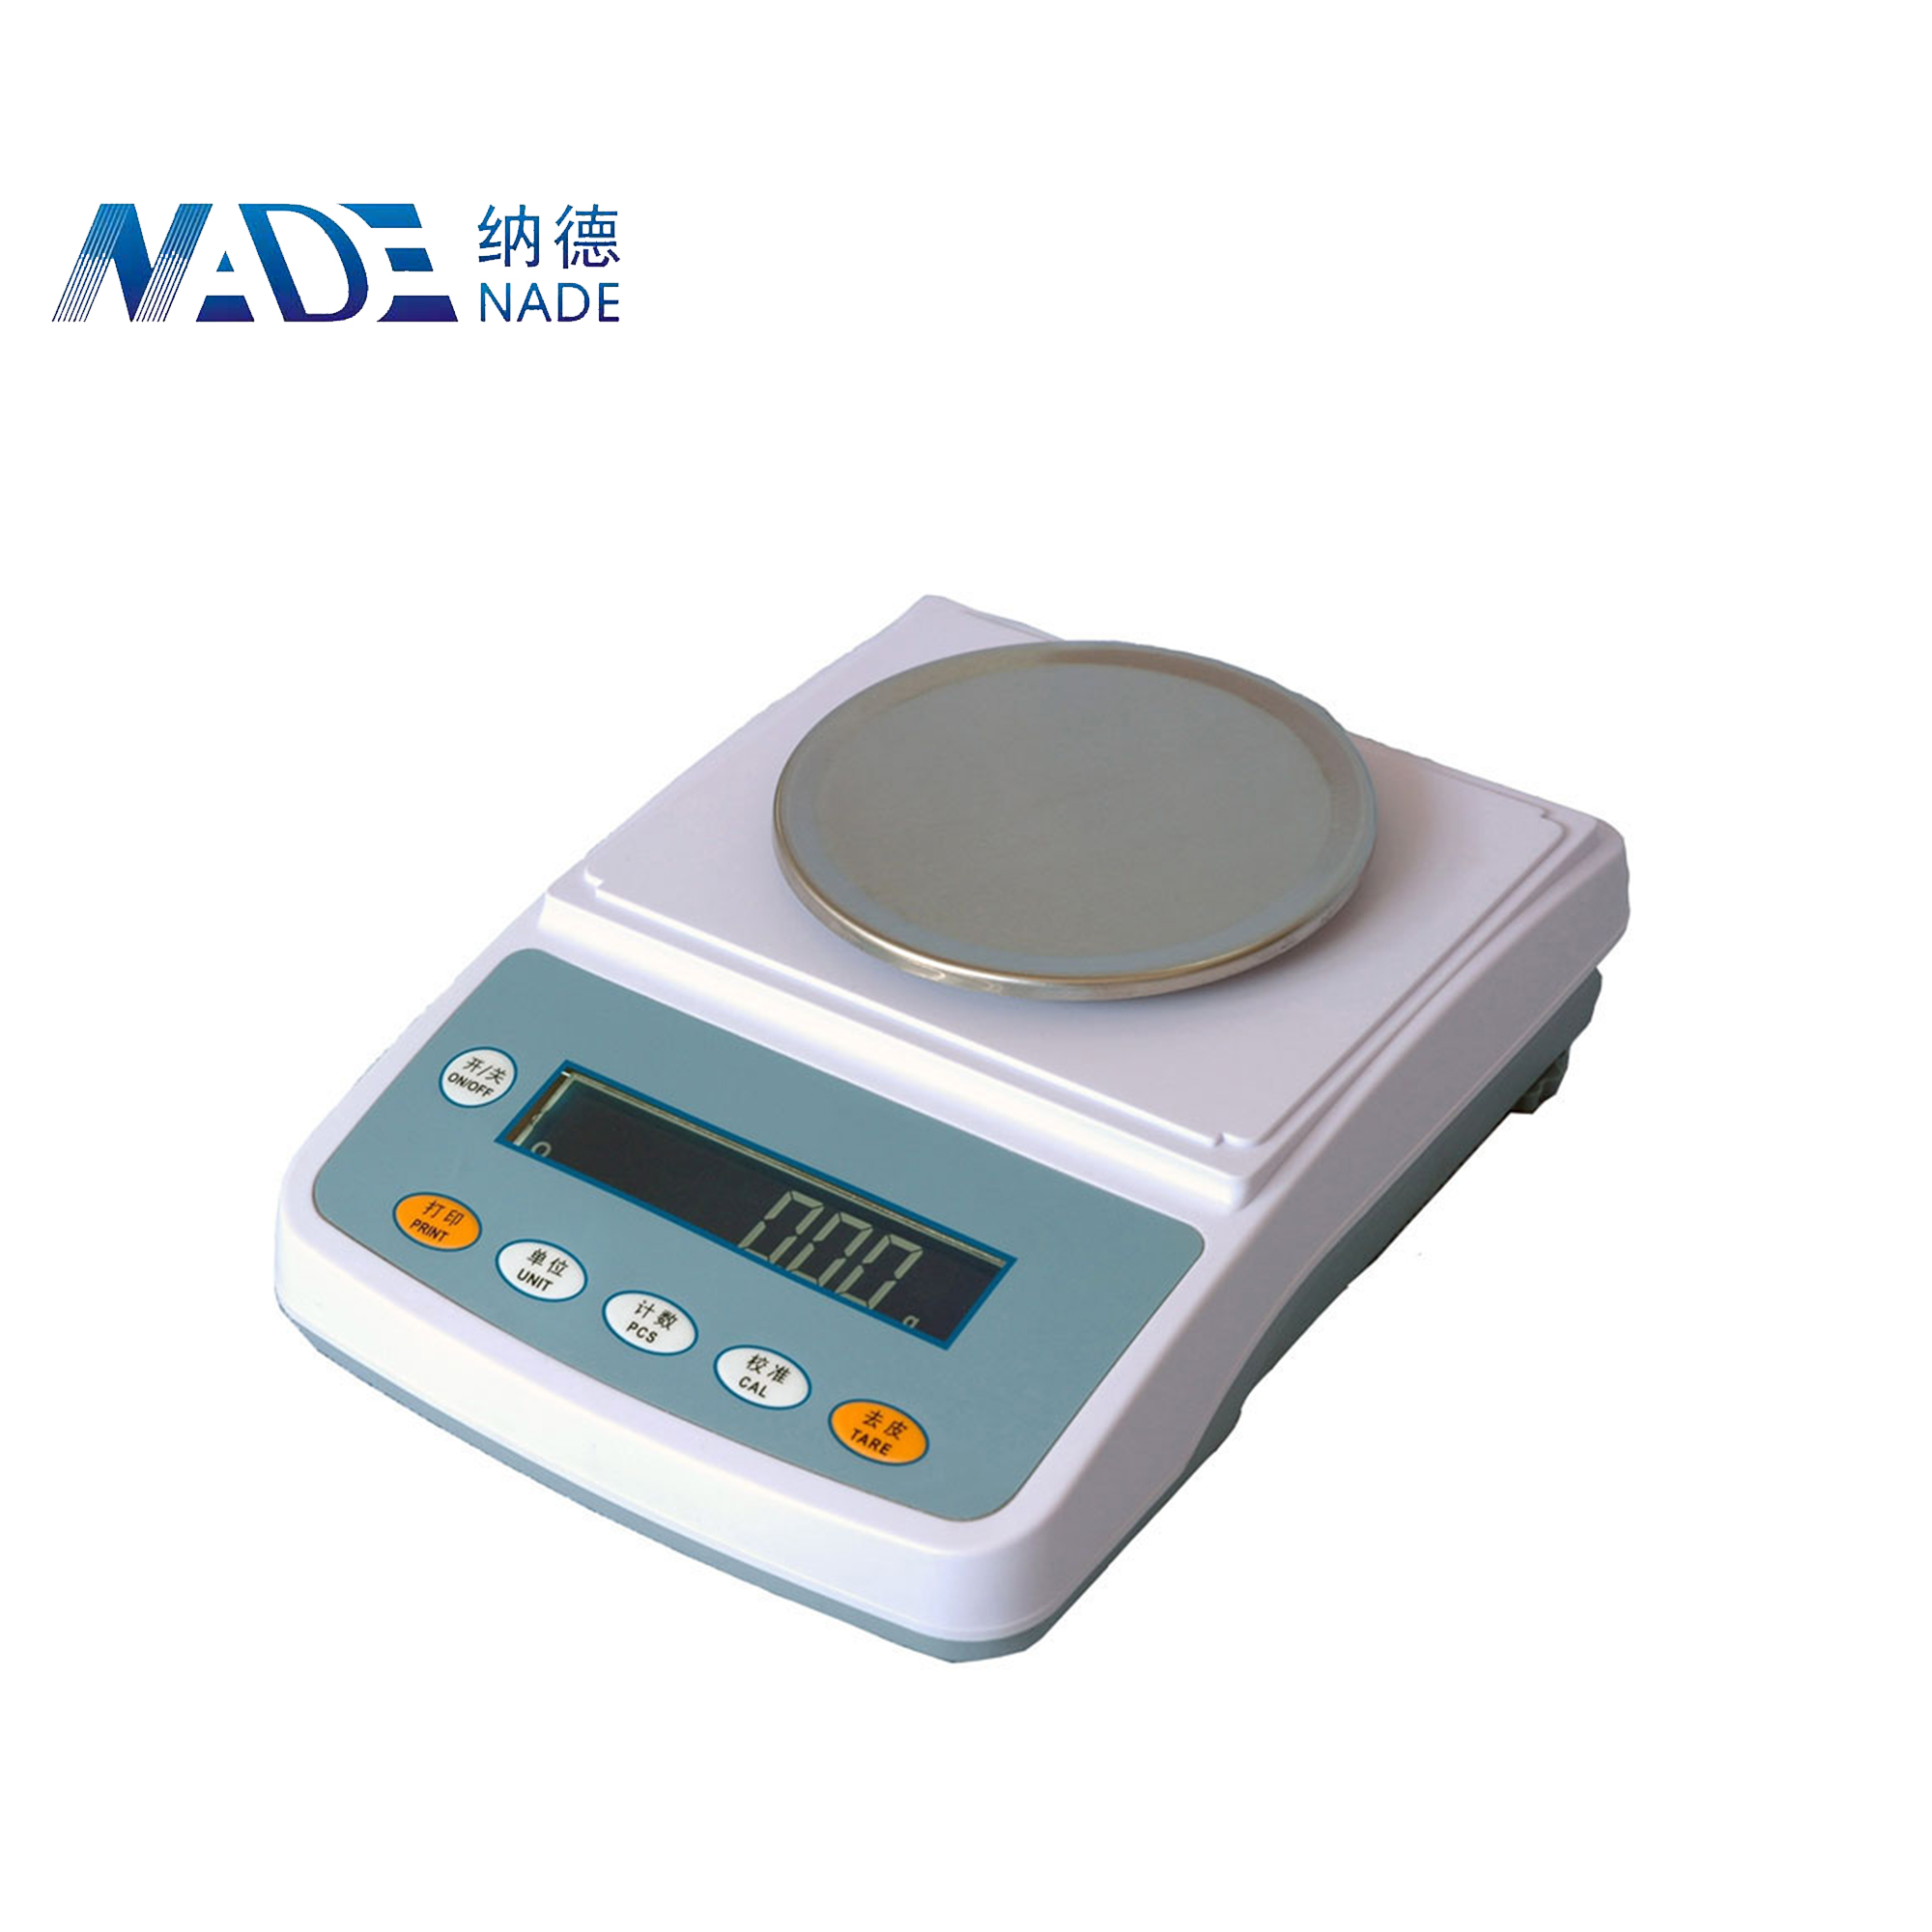 Nade JH Weighing Scales electronic balance & precision balance YP402N 400g /10mg